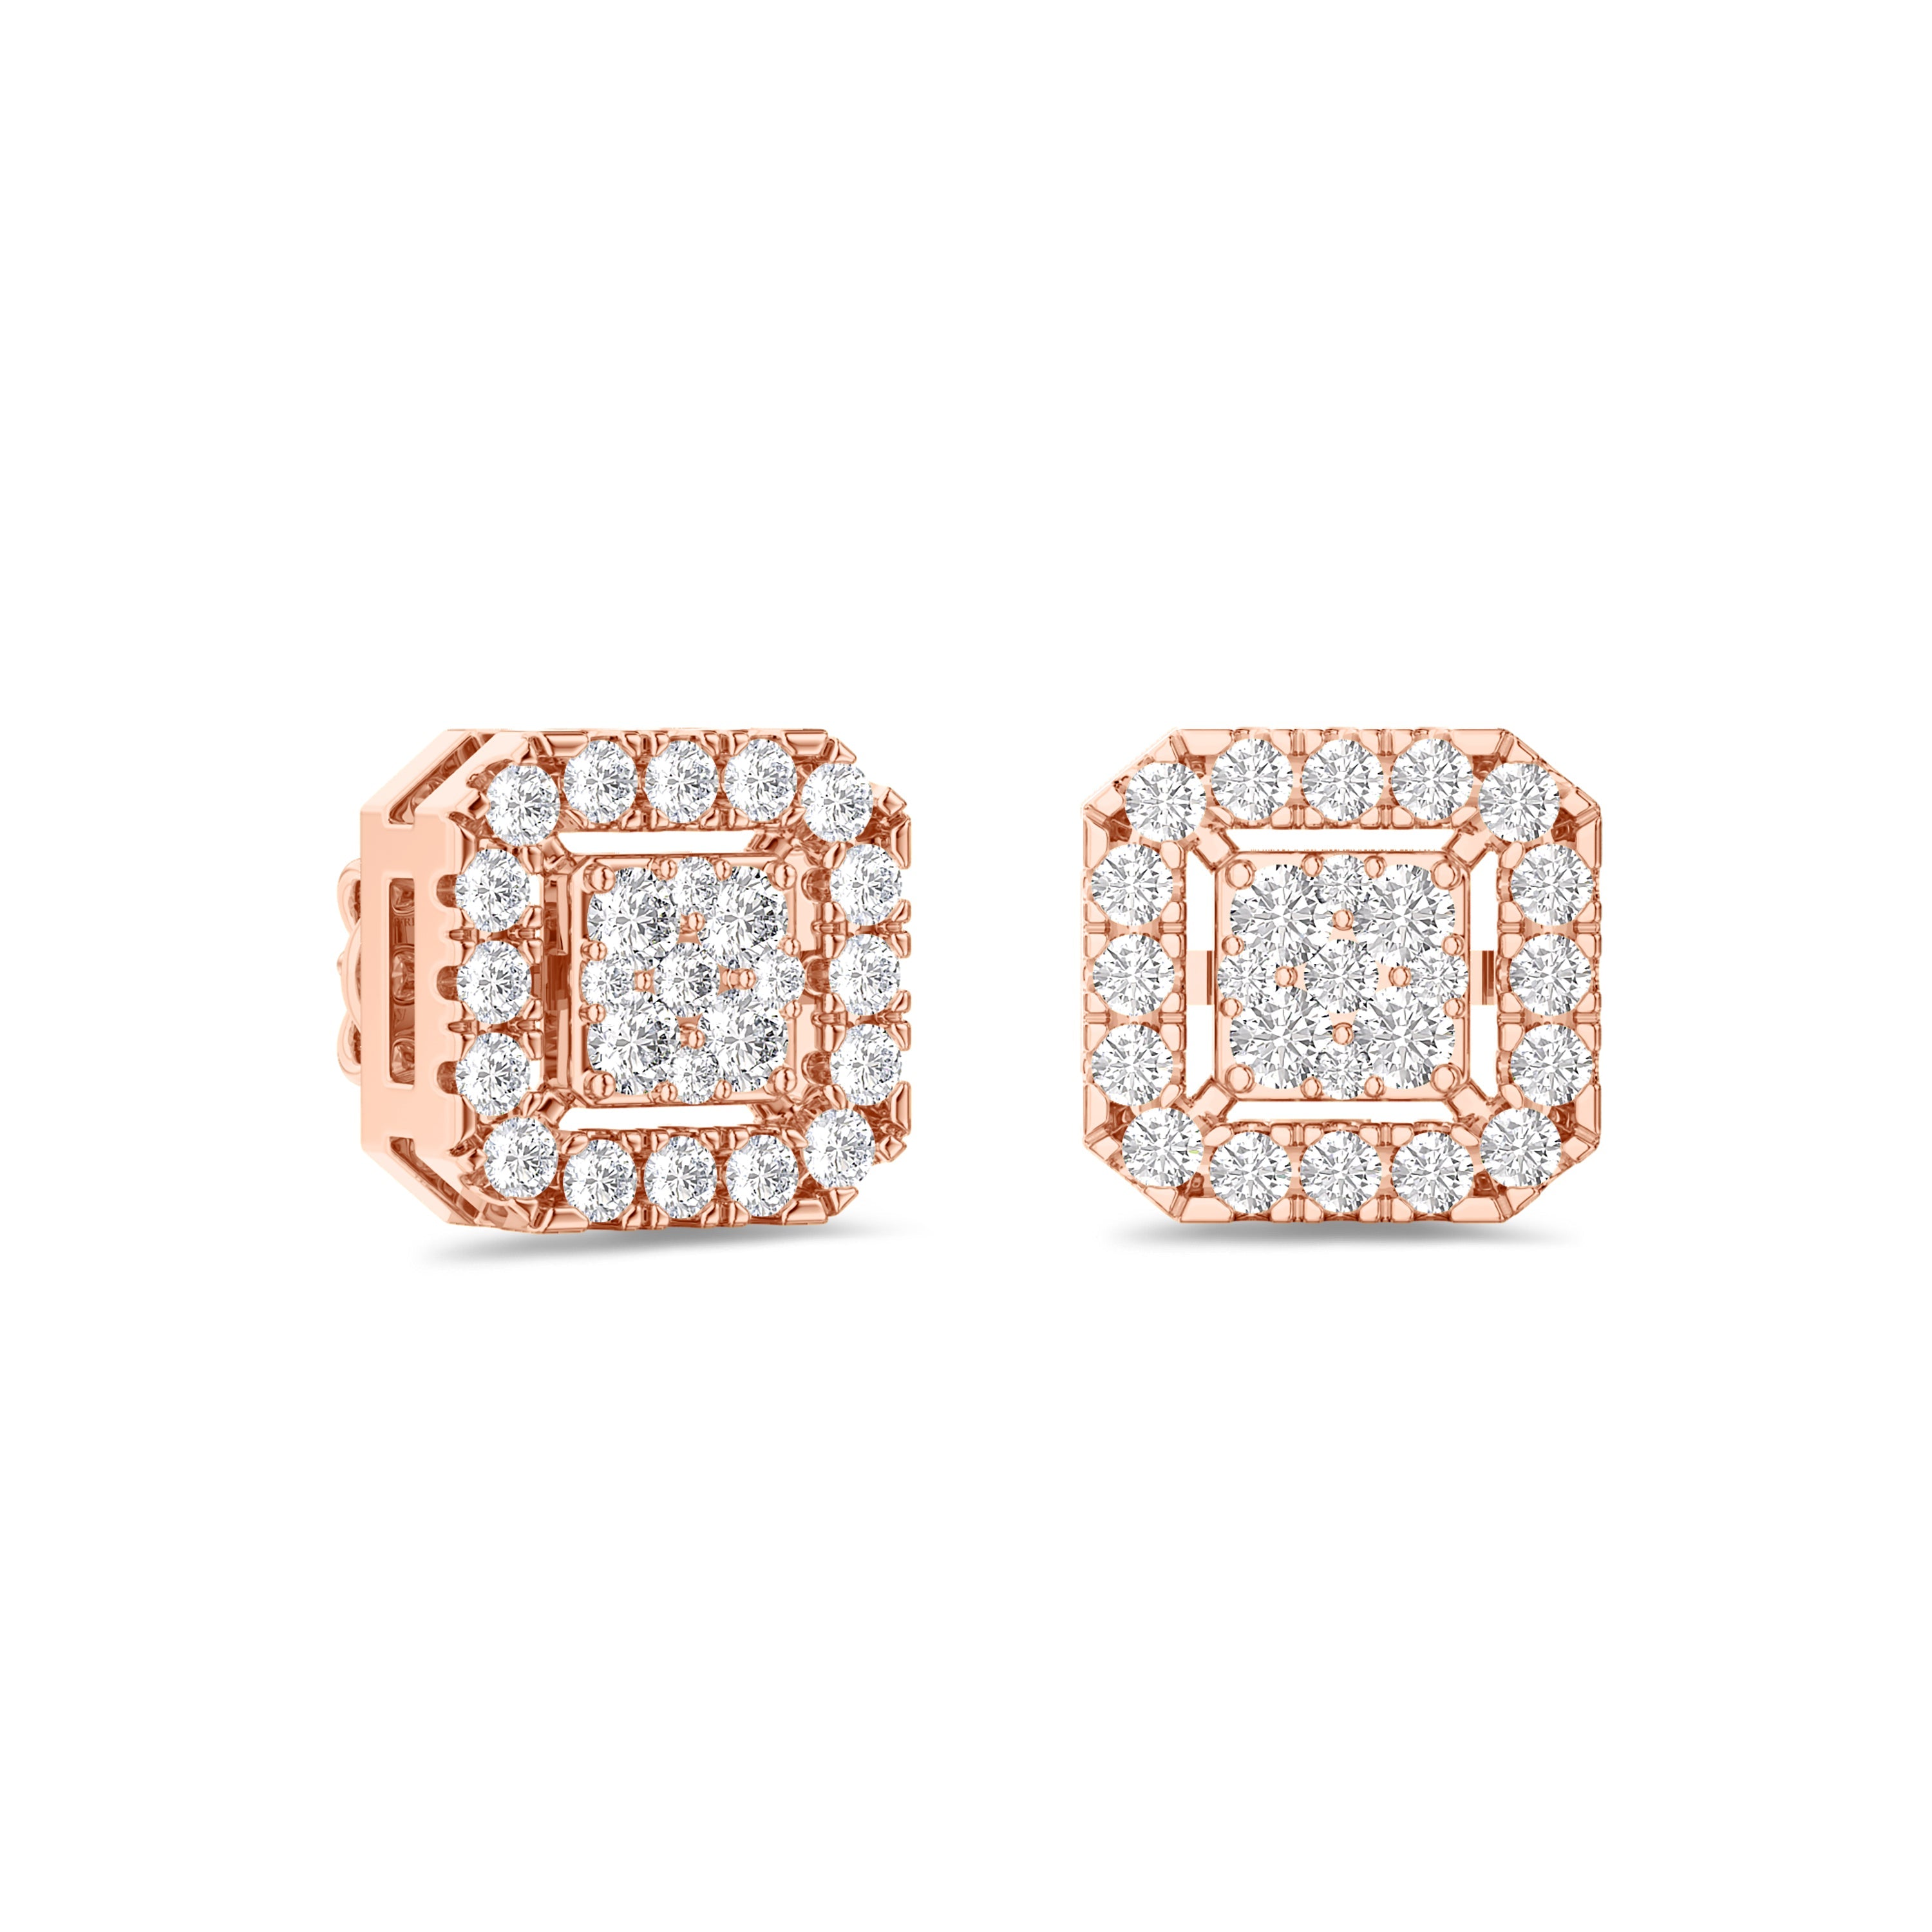 octagonal shaped cluster diamond earrings in 18k rose gold, FG color and SI clarity, 0.3 carat